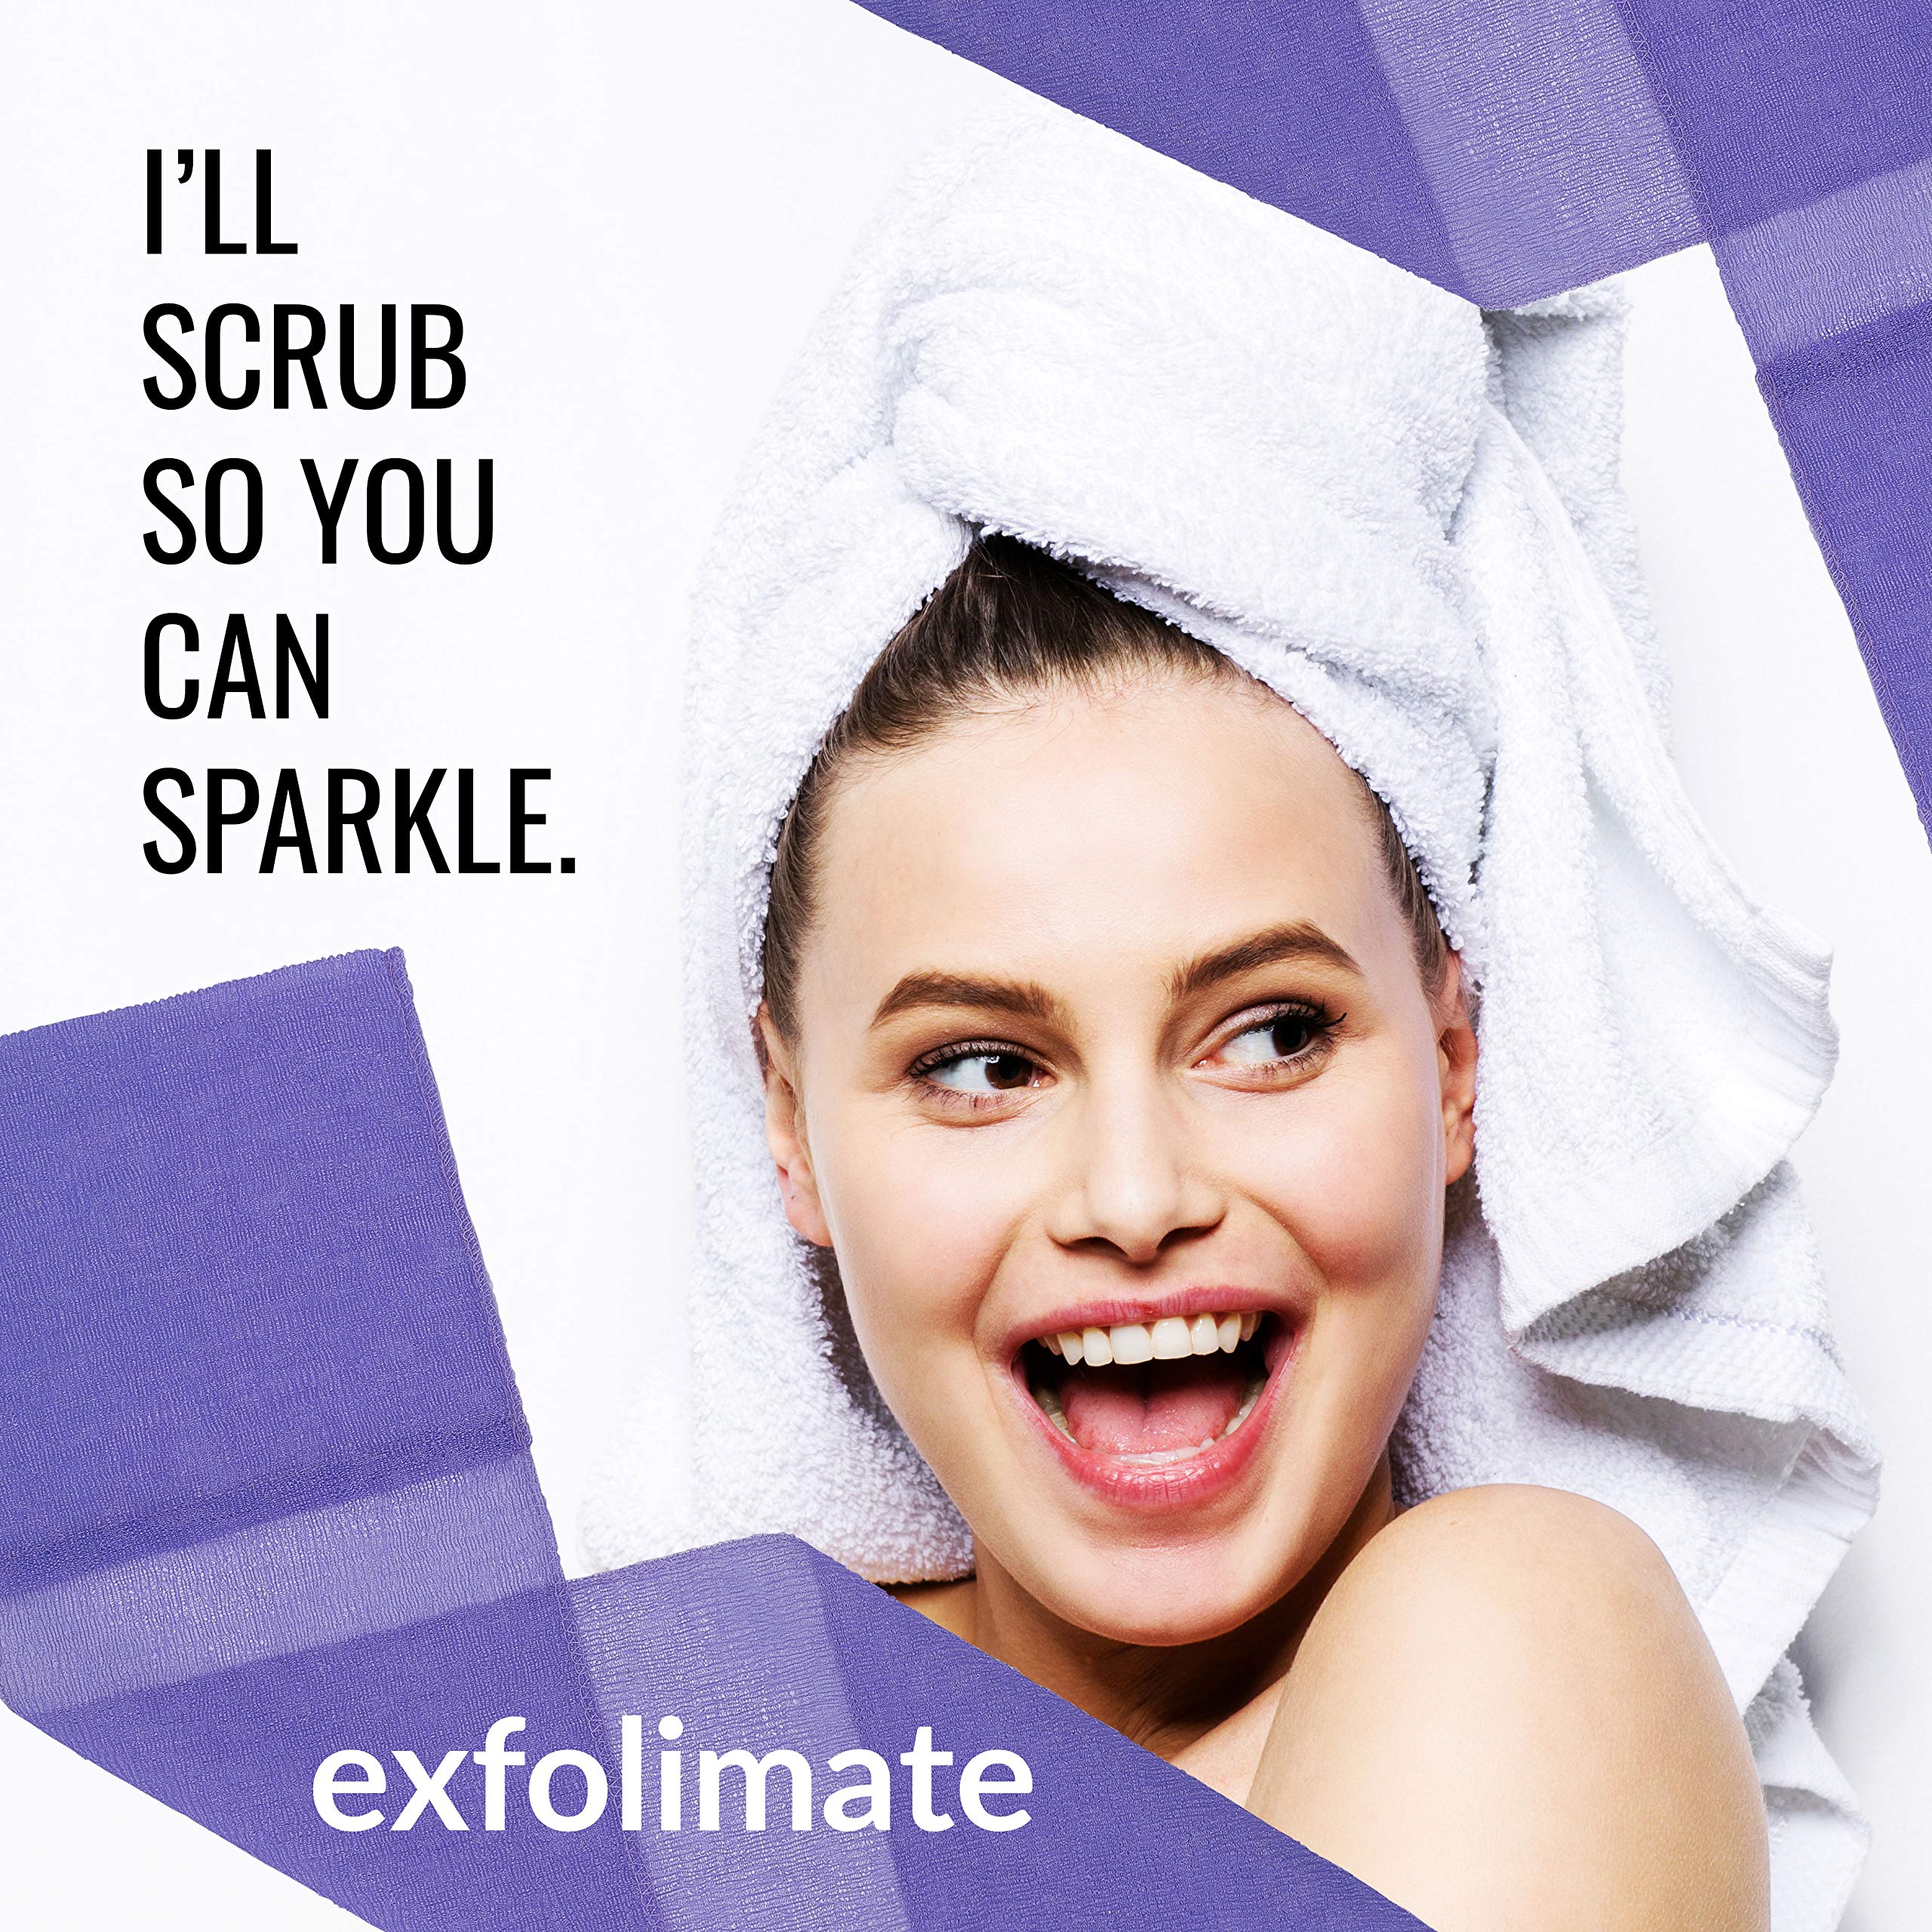 ExfoliMATE | Magic Exfoliating Shower Cloth Gently Removes Dead Skin for a Youthful Clear Complexion - only 1 cloth at a reduced price (Mystery/Surpise Color - Pocket 2.0)